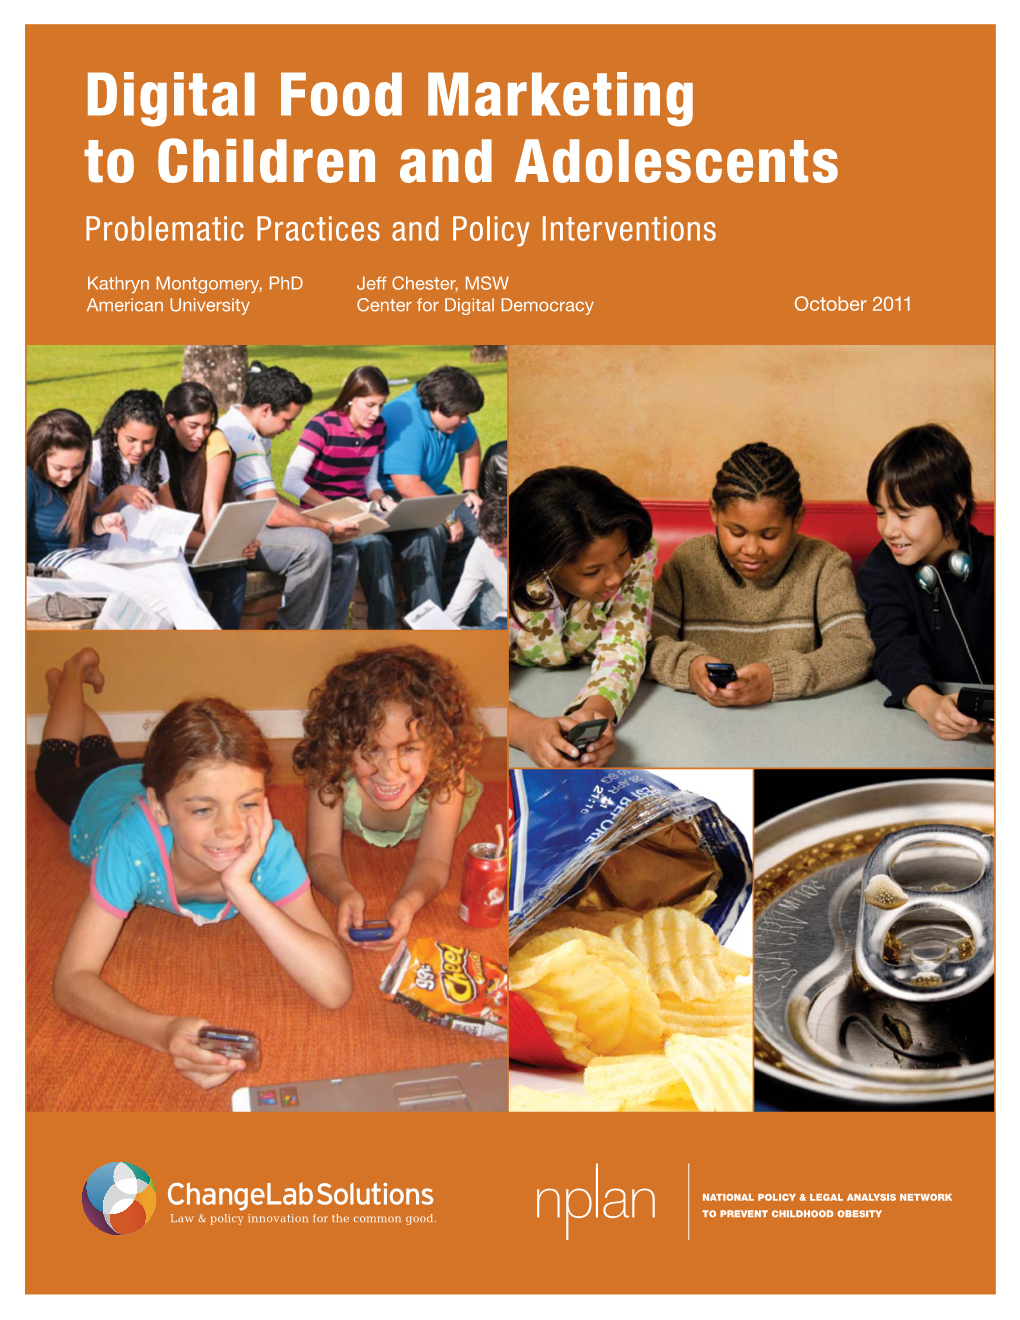 Digital Food Marketing to Children and Adolescents Problematic Practices and Policy Interventions